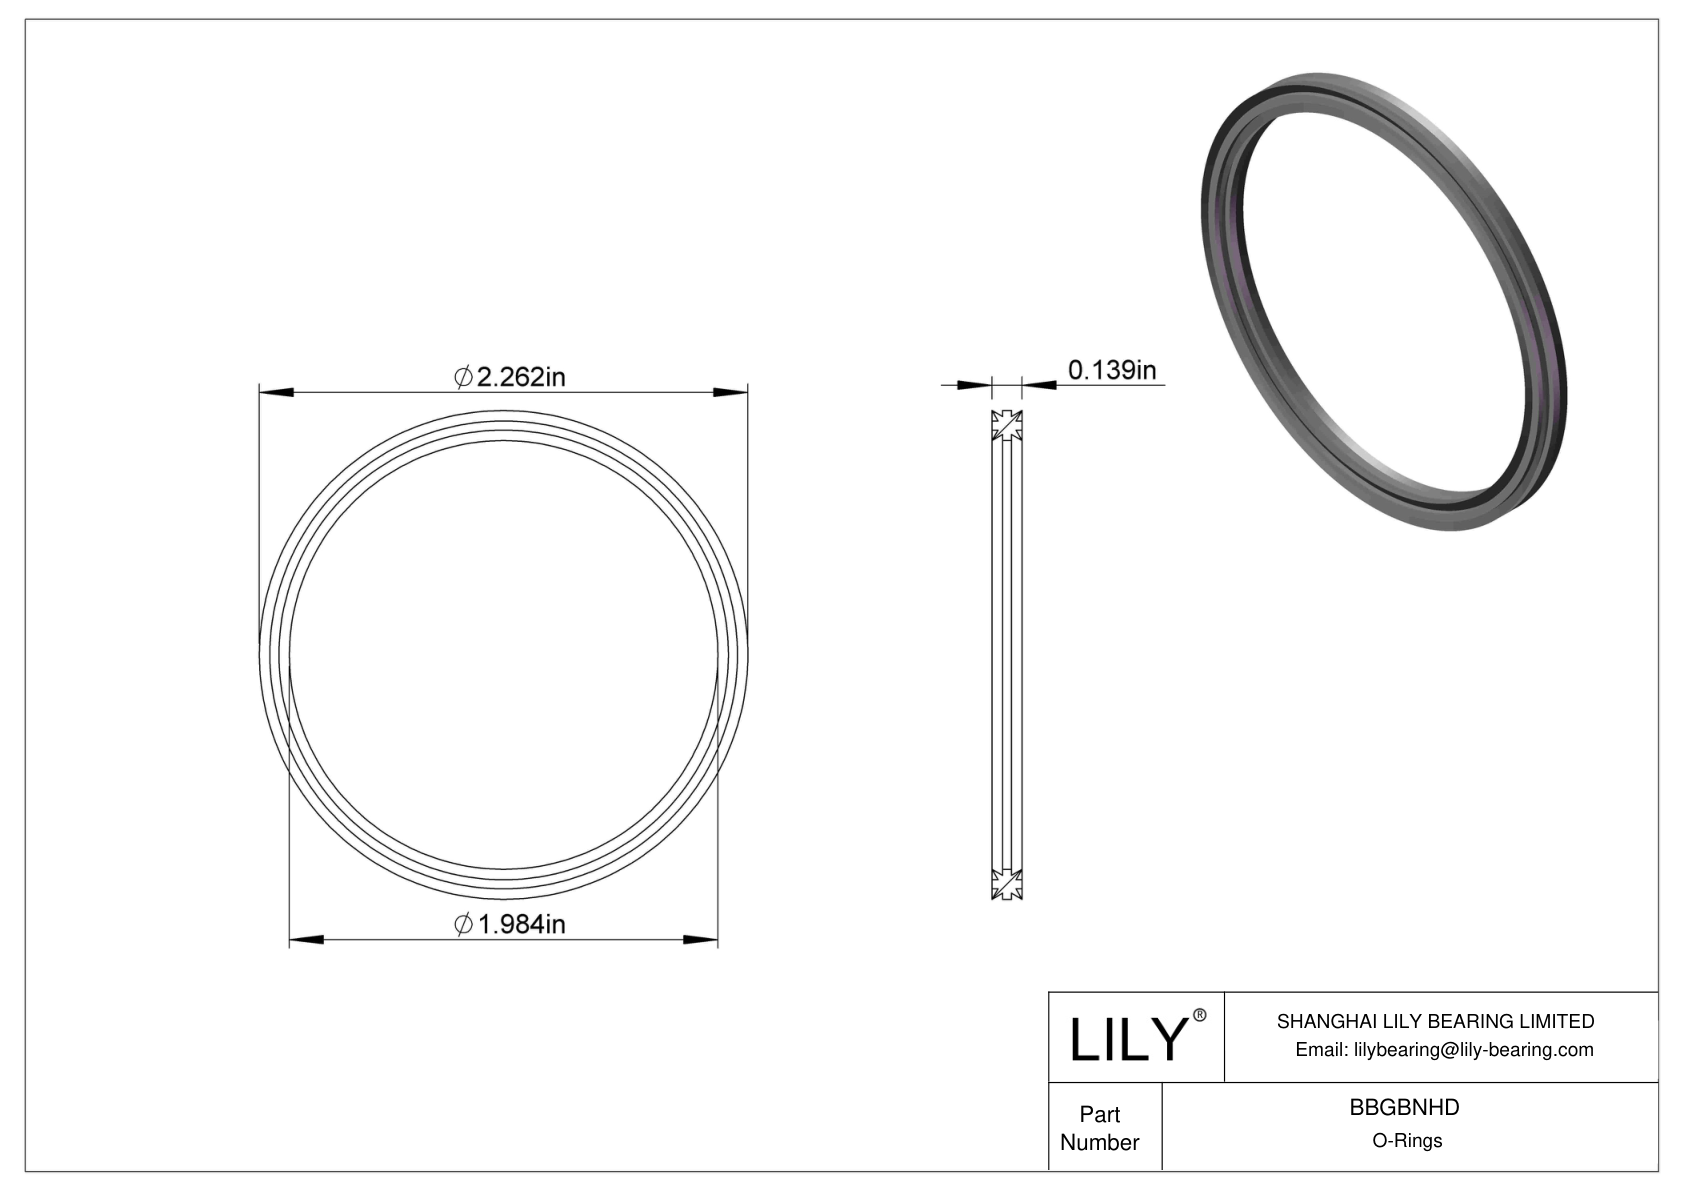 BBGBNHD Oil Resistant O-Rings Double X cad drawing